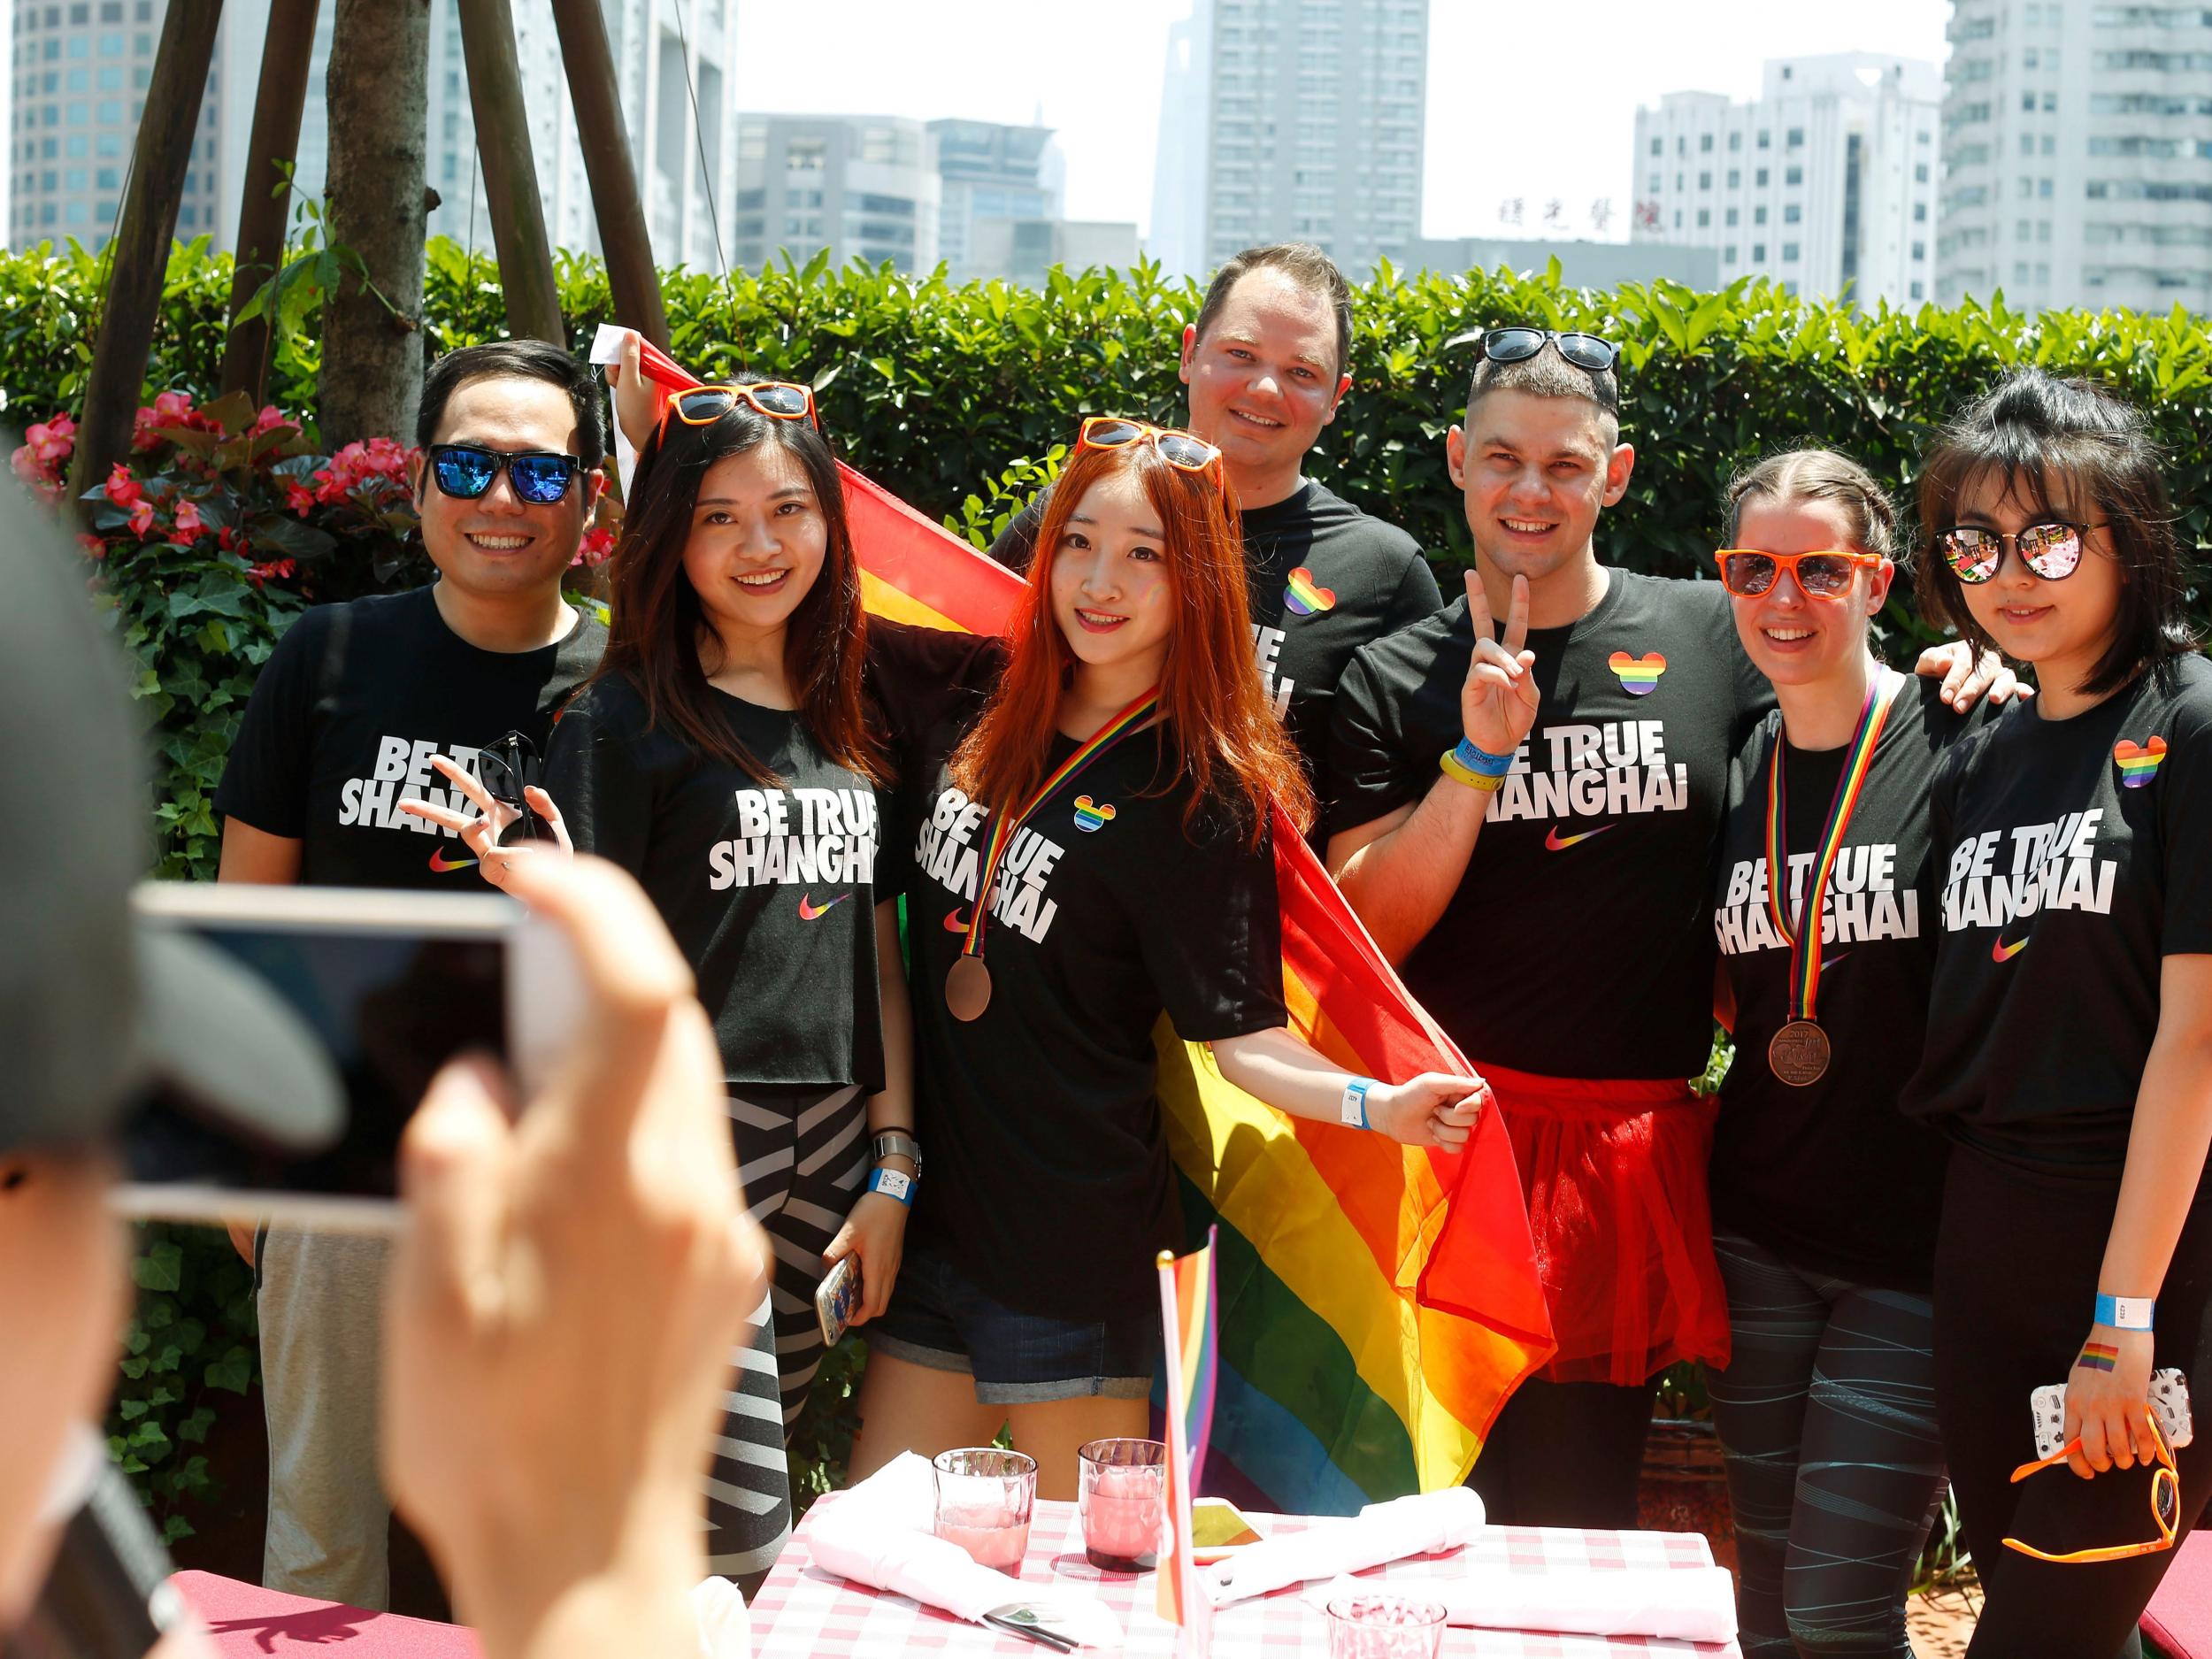 A group poses for photos after taking part in the Pride Run in Shanghai in June 2017